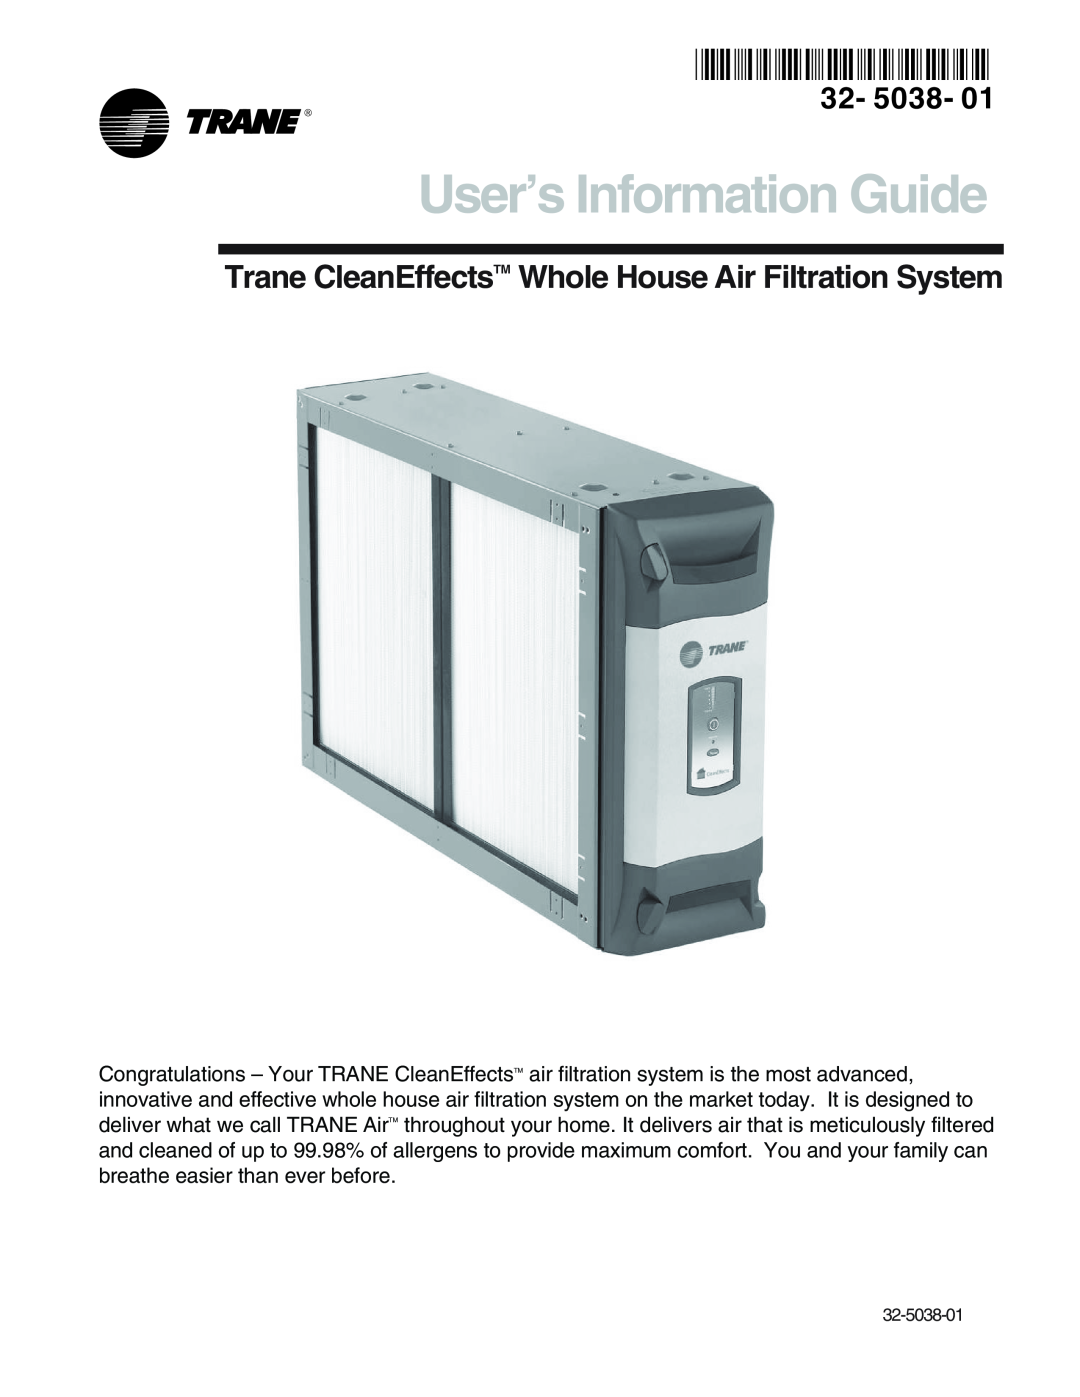 Trane Air Filtration System manual User’s Information Guide, 32- 5038 